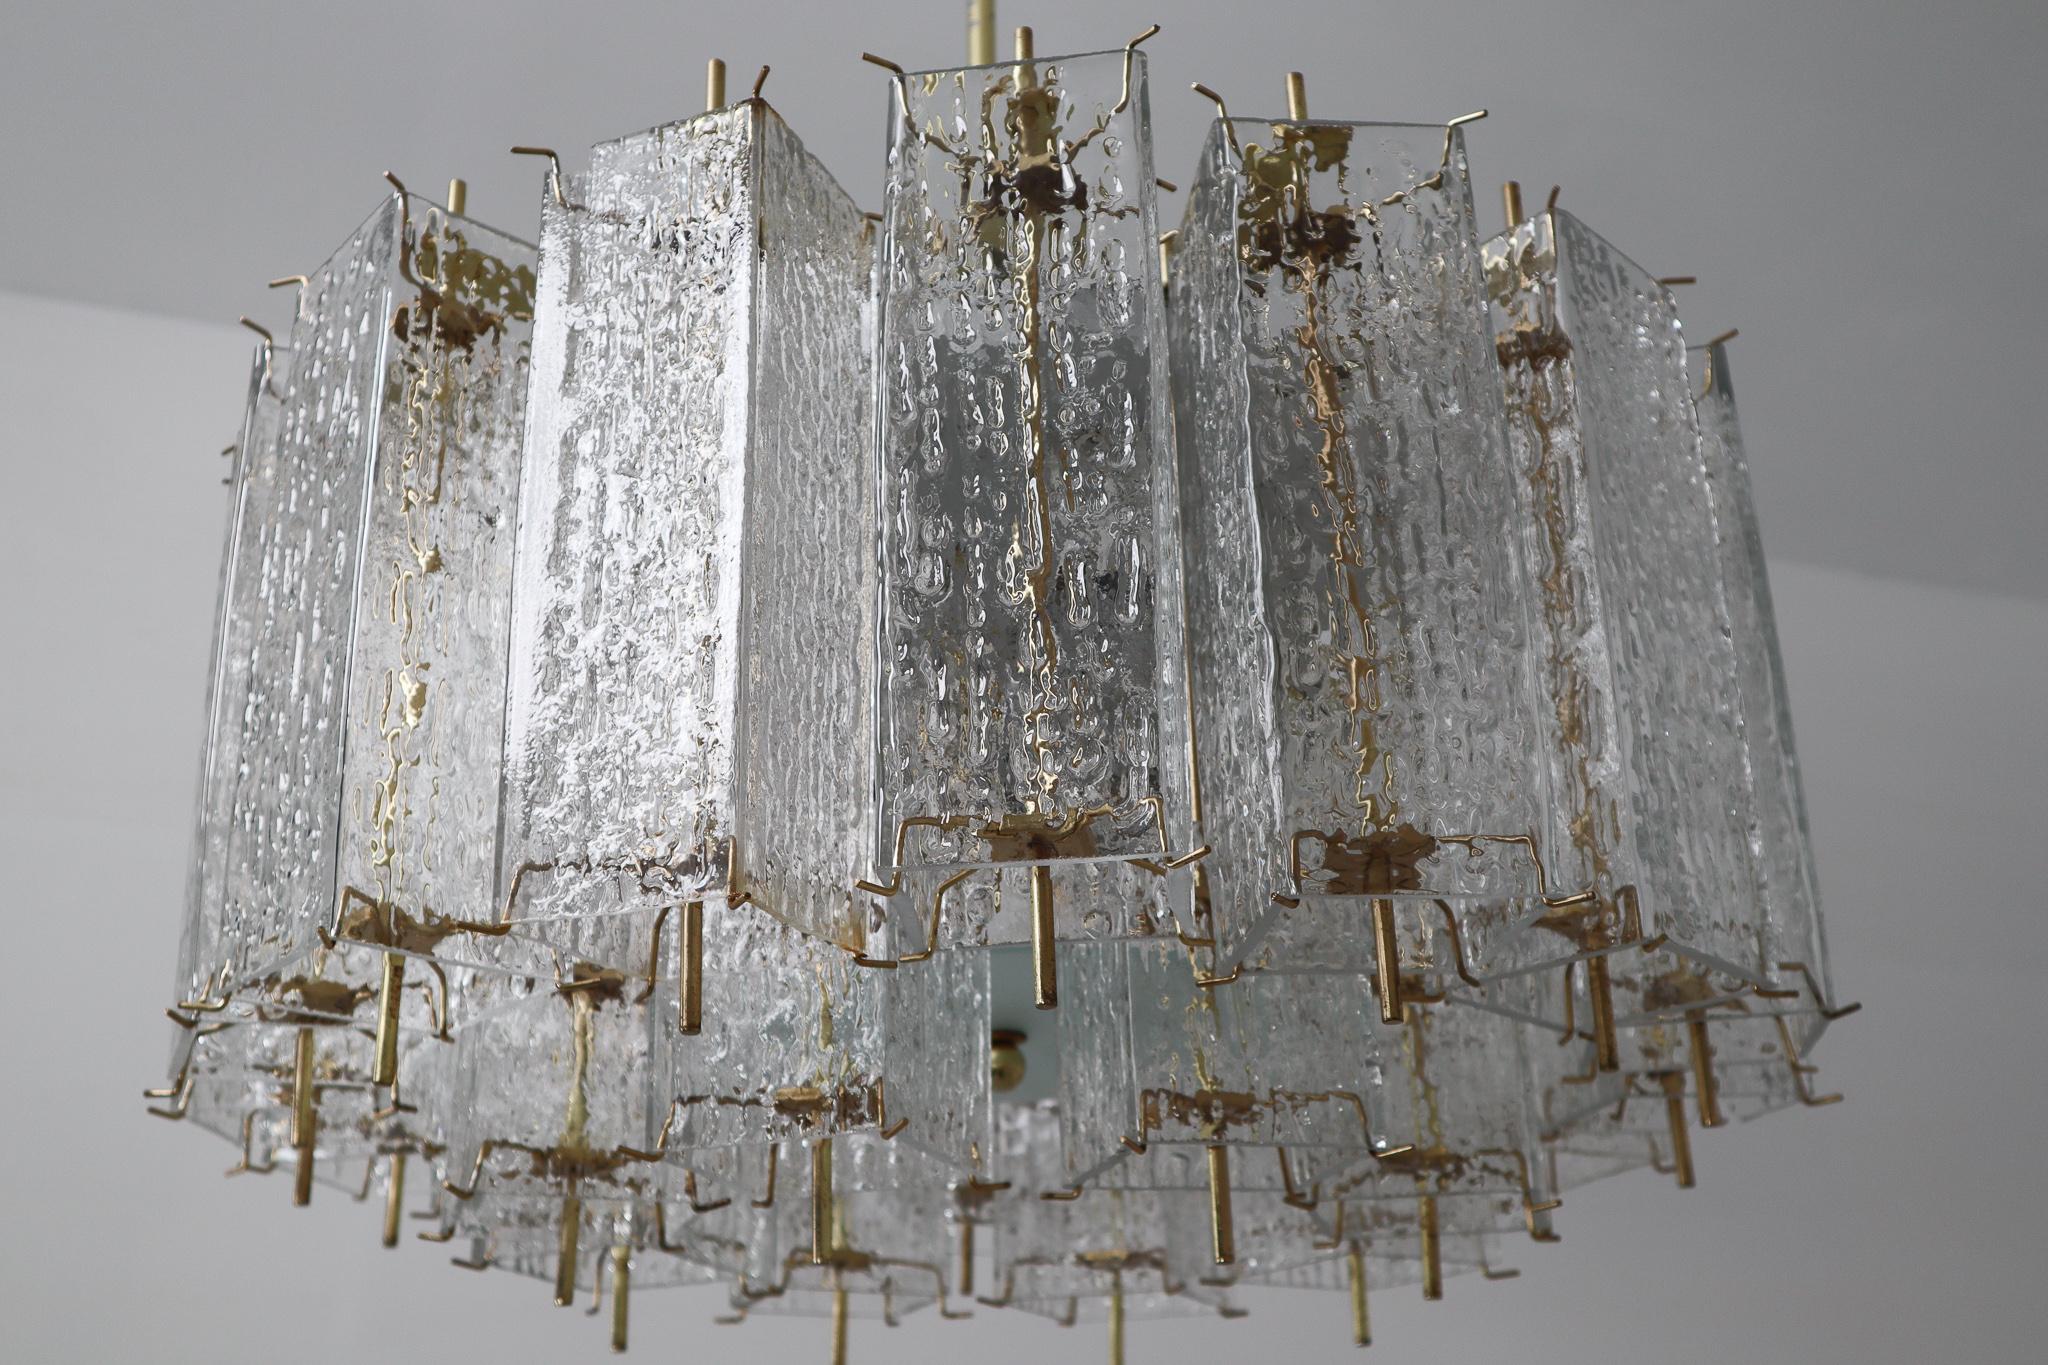 Large Midcentury Chandelier with Ice Glass Tubes in Brass Fixture Europe, 1960s For Sale 4